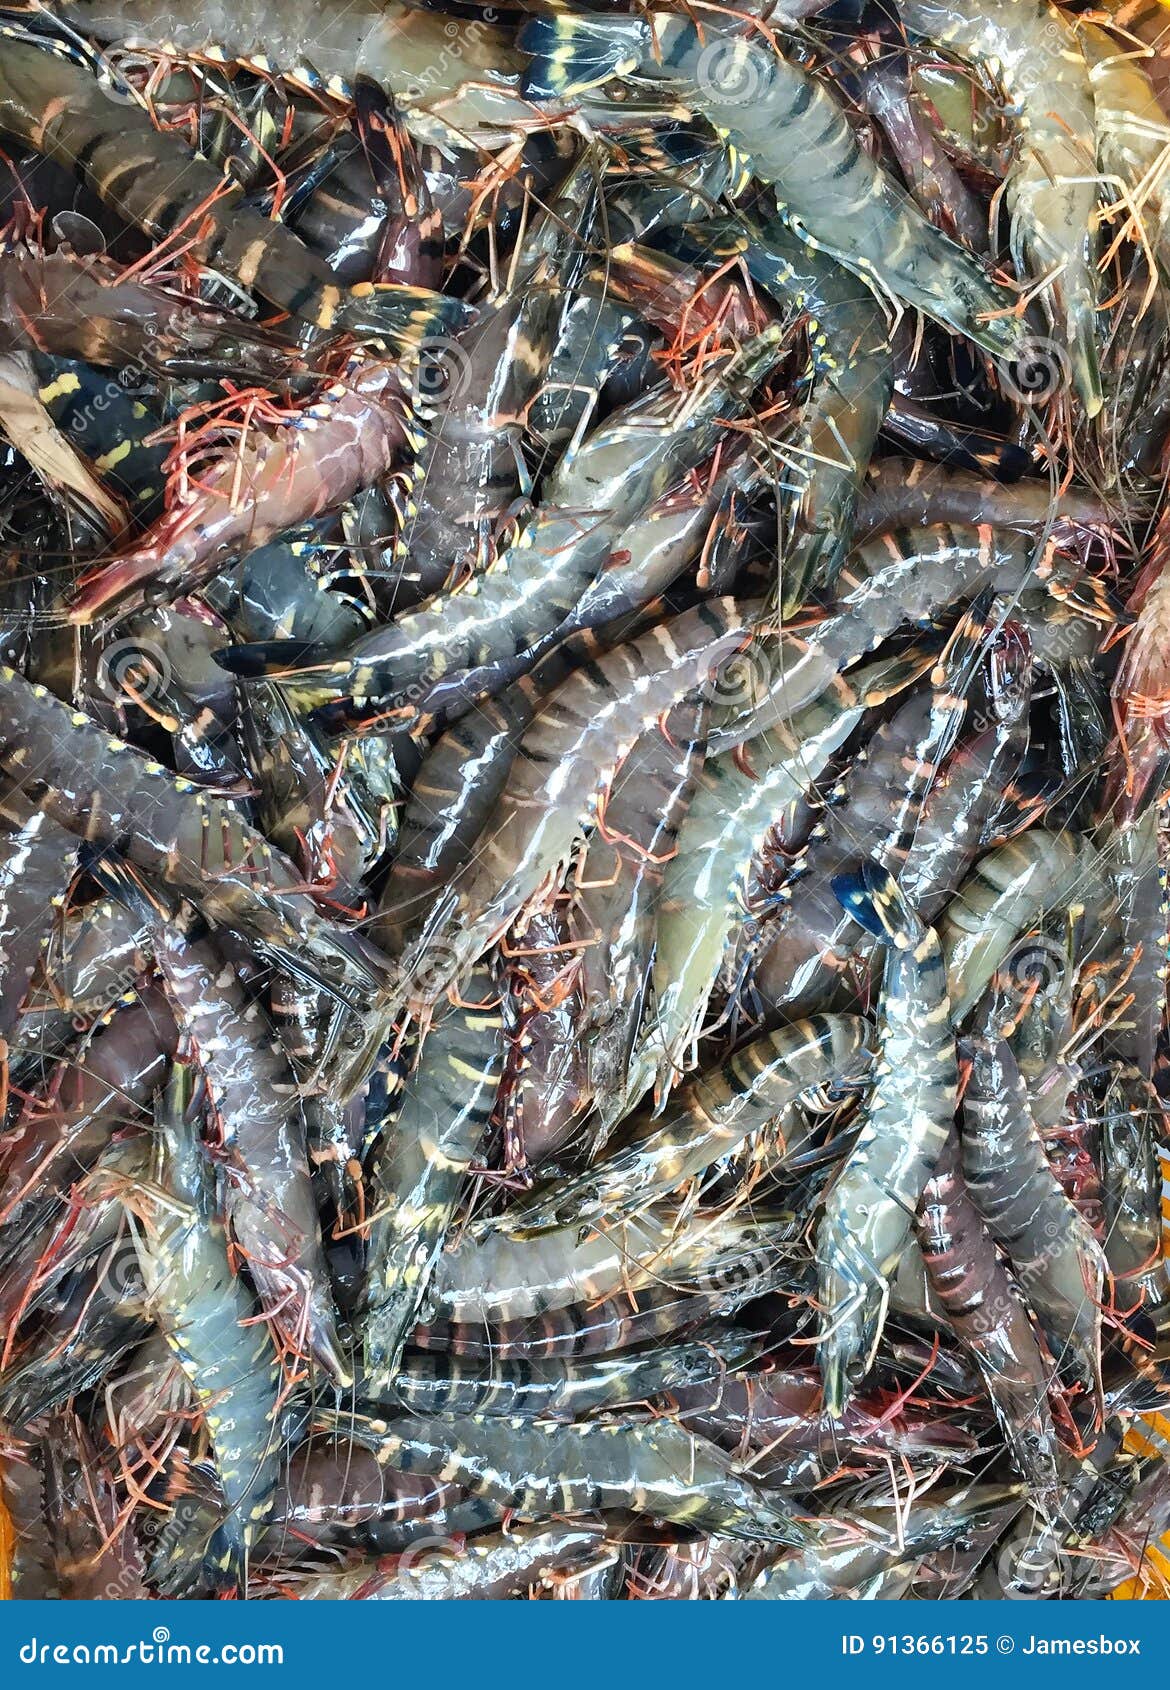 Fresh Raw Tiger Shrimp in Fishing Net after Harvesting from Pond